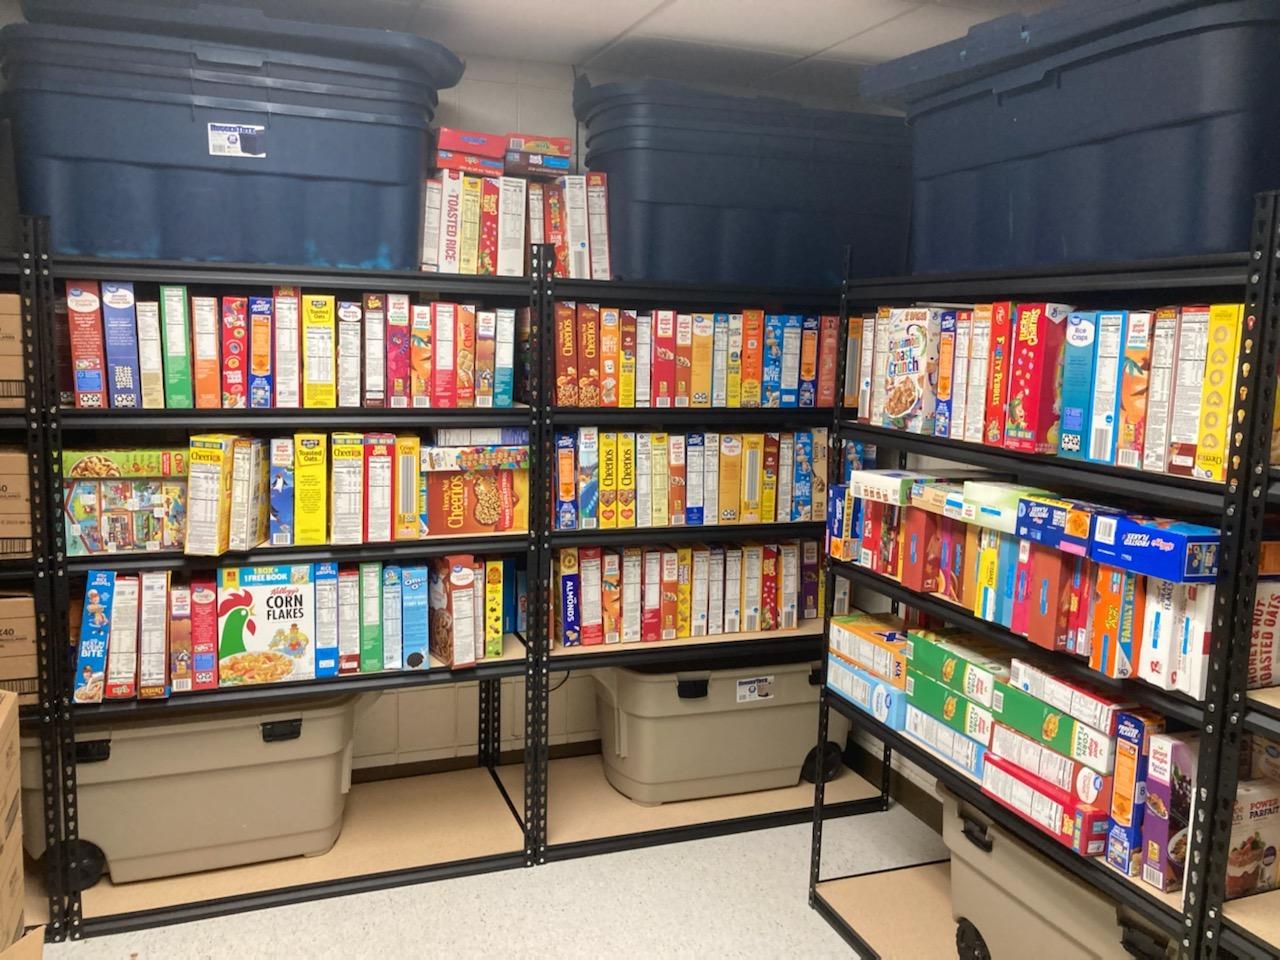 The cereal collection was donated to the districts’s Backpacks-to-Go program